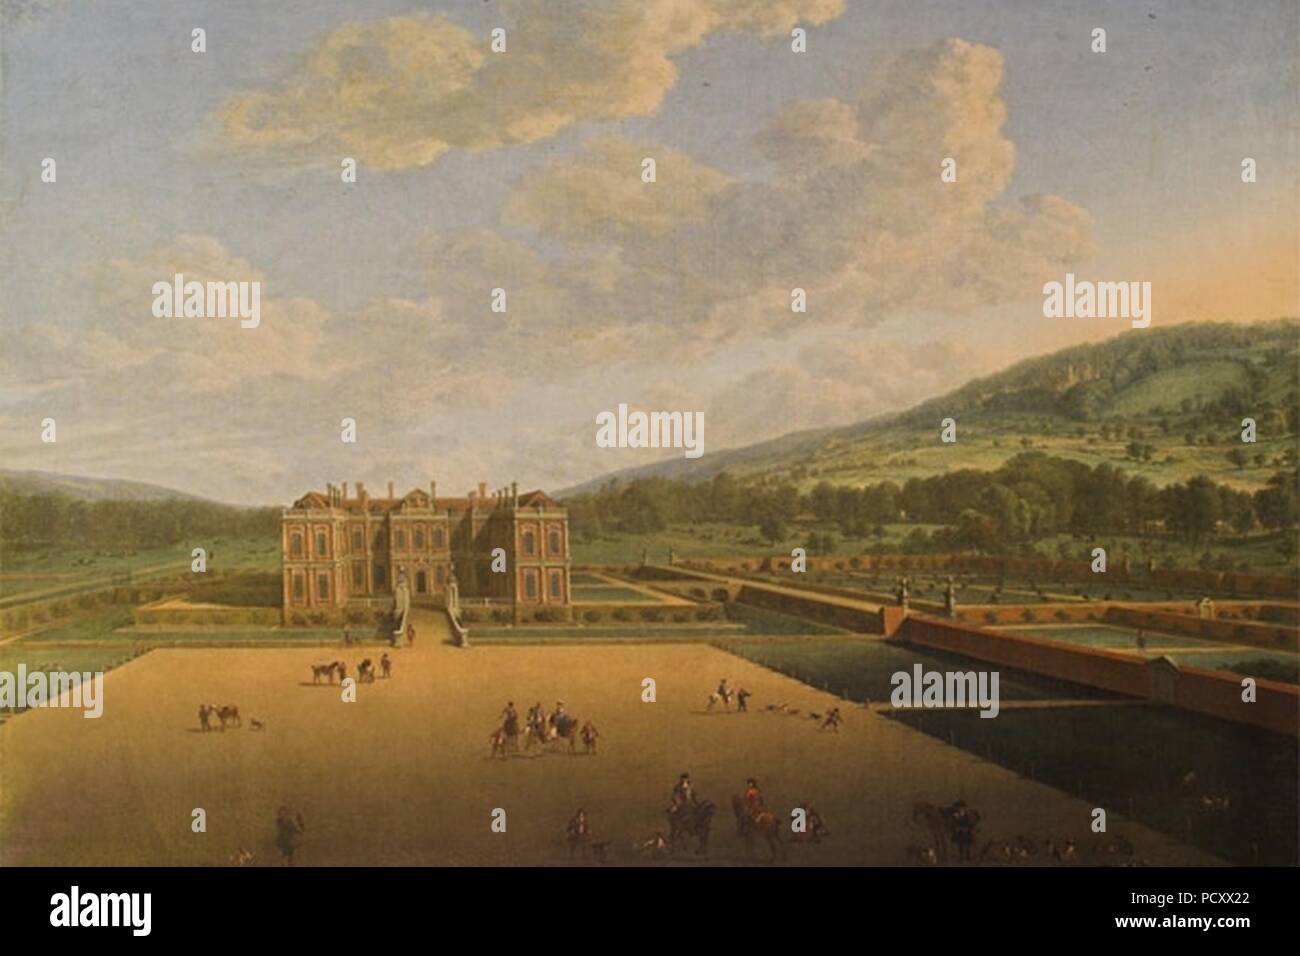 Althorp in 1677 by John Vosterman. Stock Photo